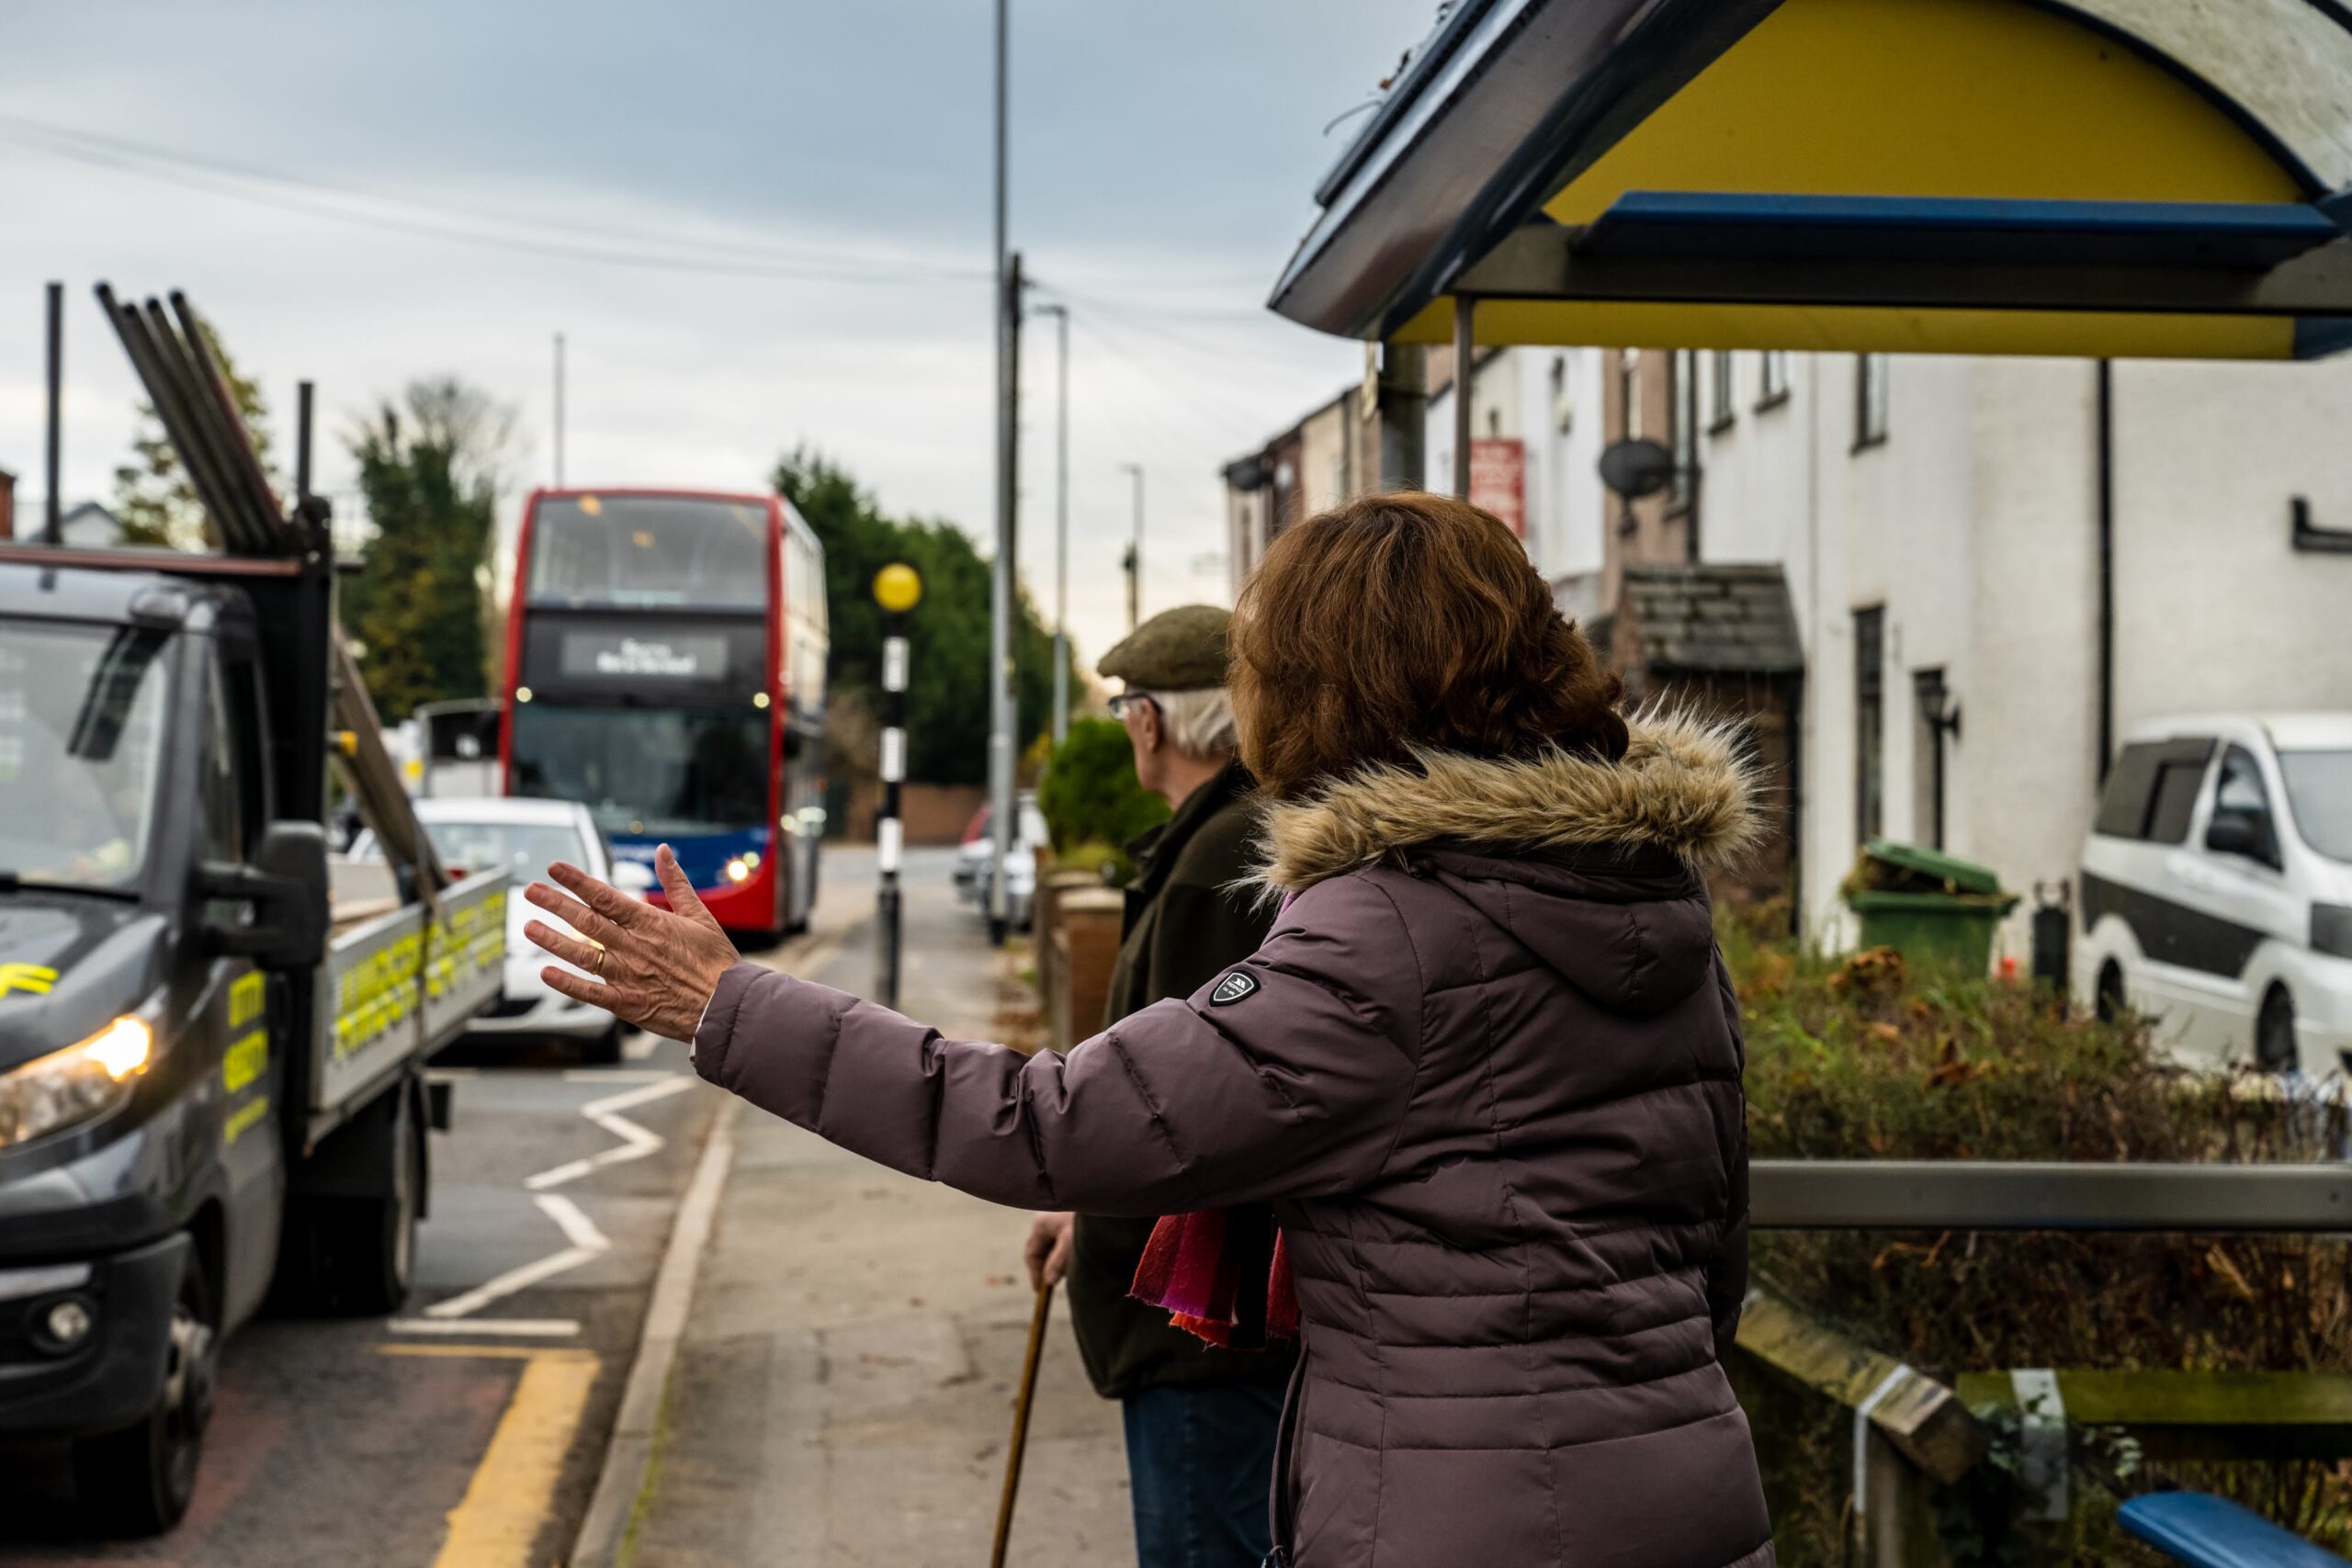 woman at bus stop with arm out to flag approaching bus